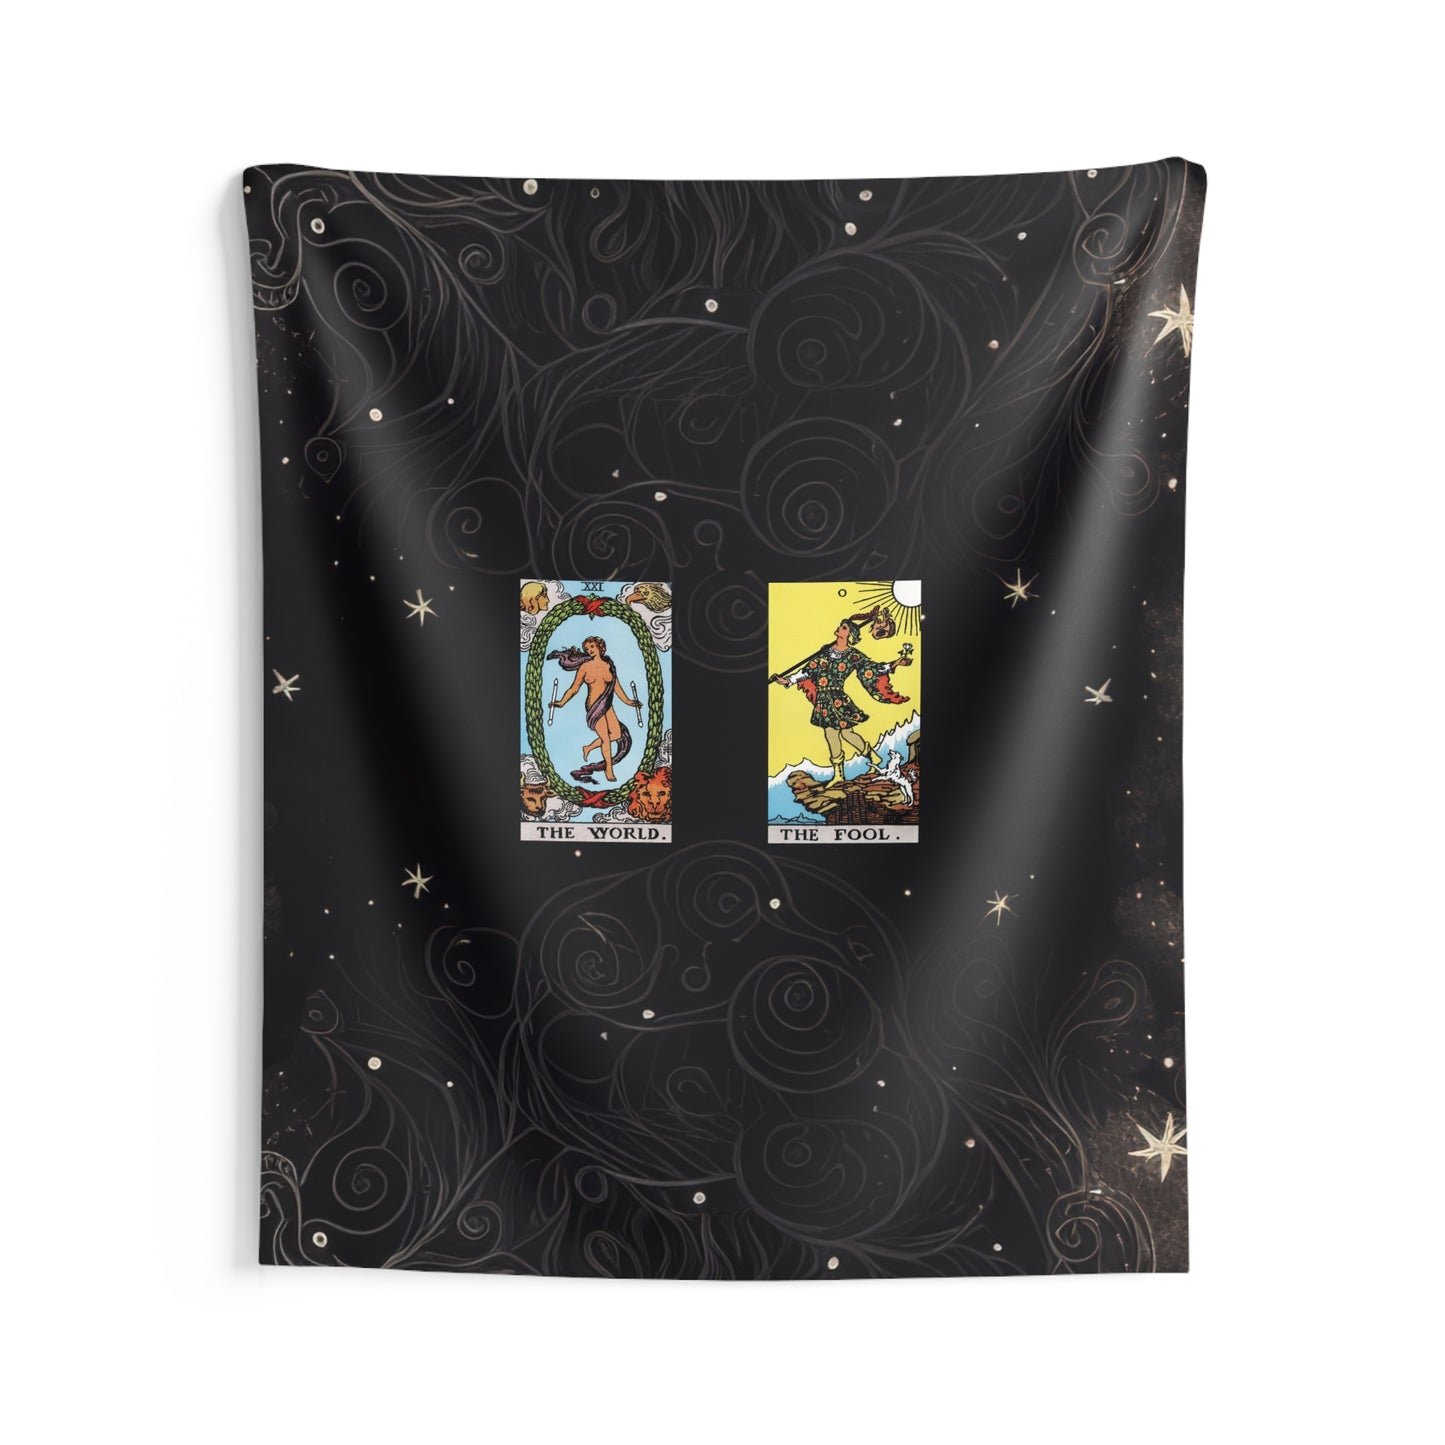 The World AND The Fool Tarot Cards Altar Cloth or Tapestry with Starry Background